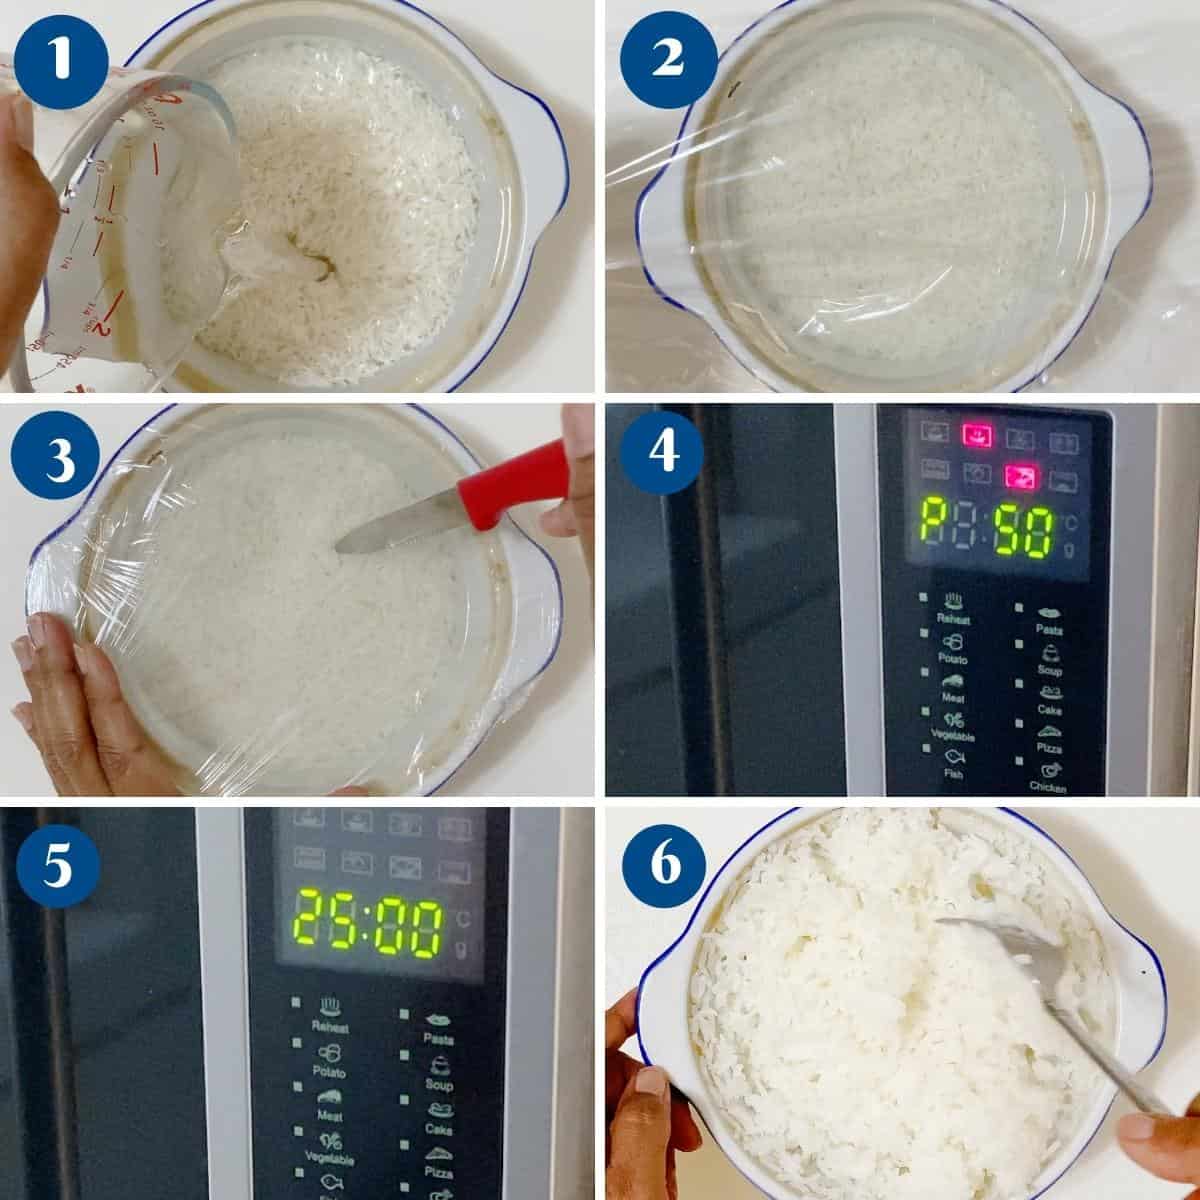 Progress pictures cooking basmati rice in the microwave.